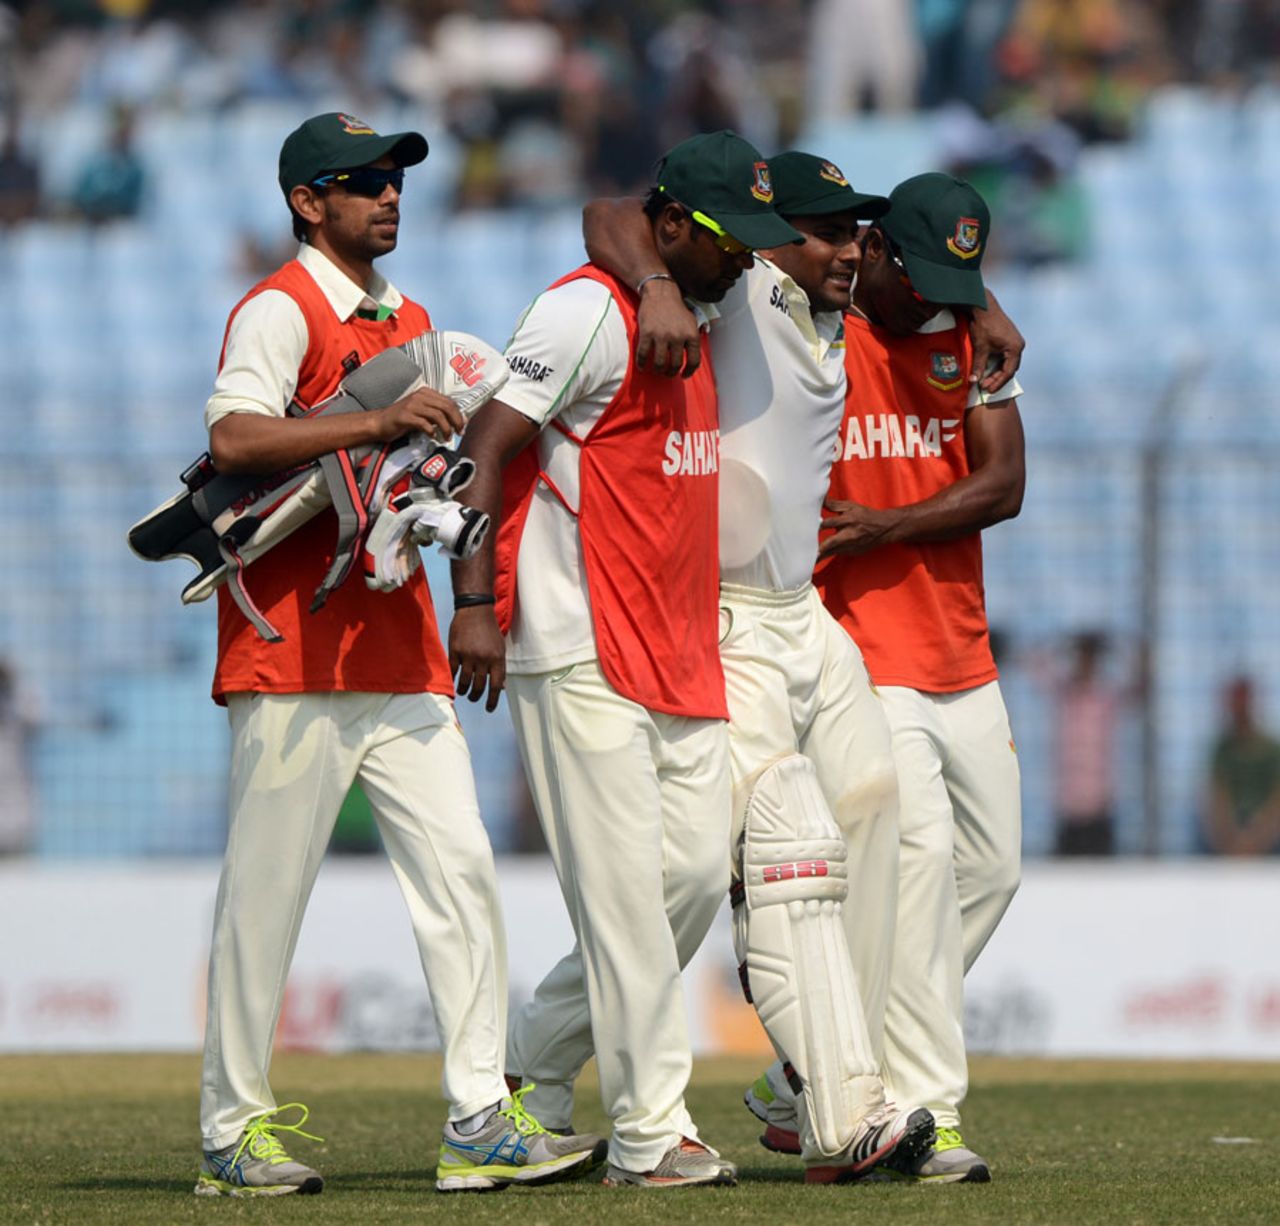 Imrul Kayes is helped off the field after pulling his hamstring, Bangladesh v Sri Lanka, 2nd Test, Chittagong, 3rd day, February 6, 2014